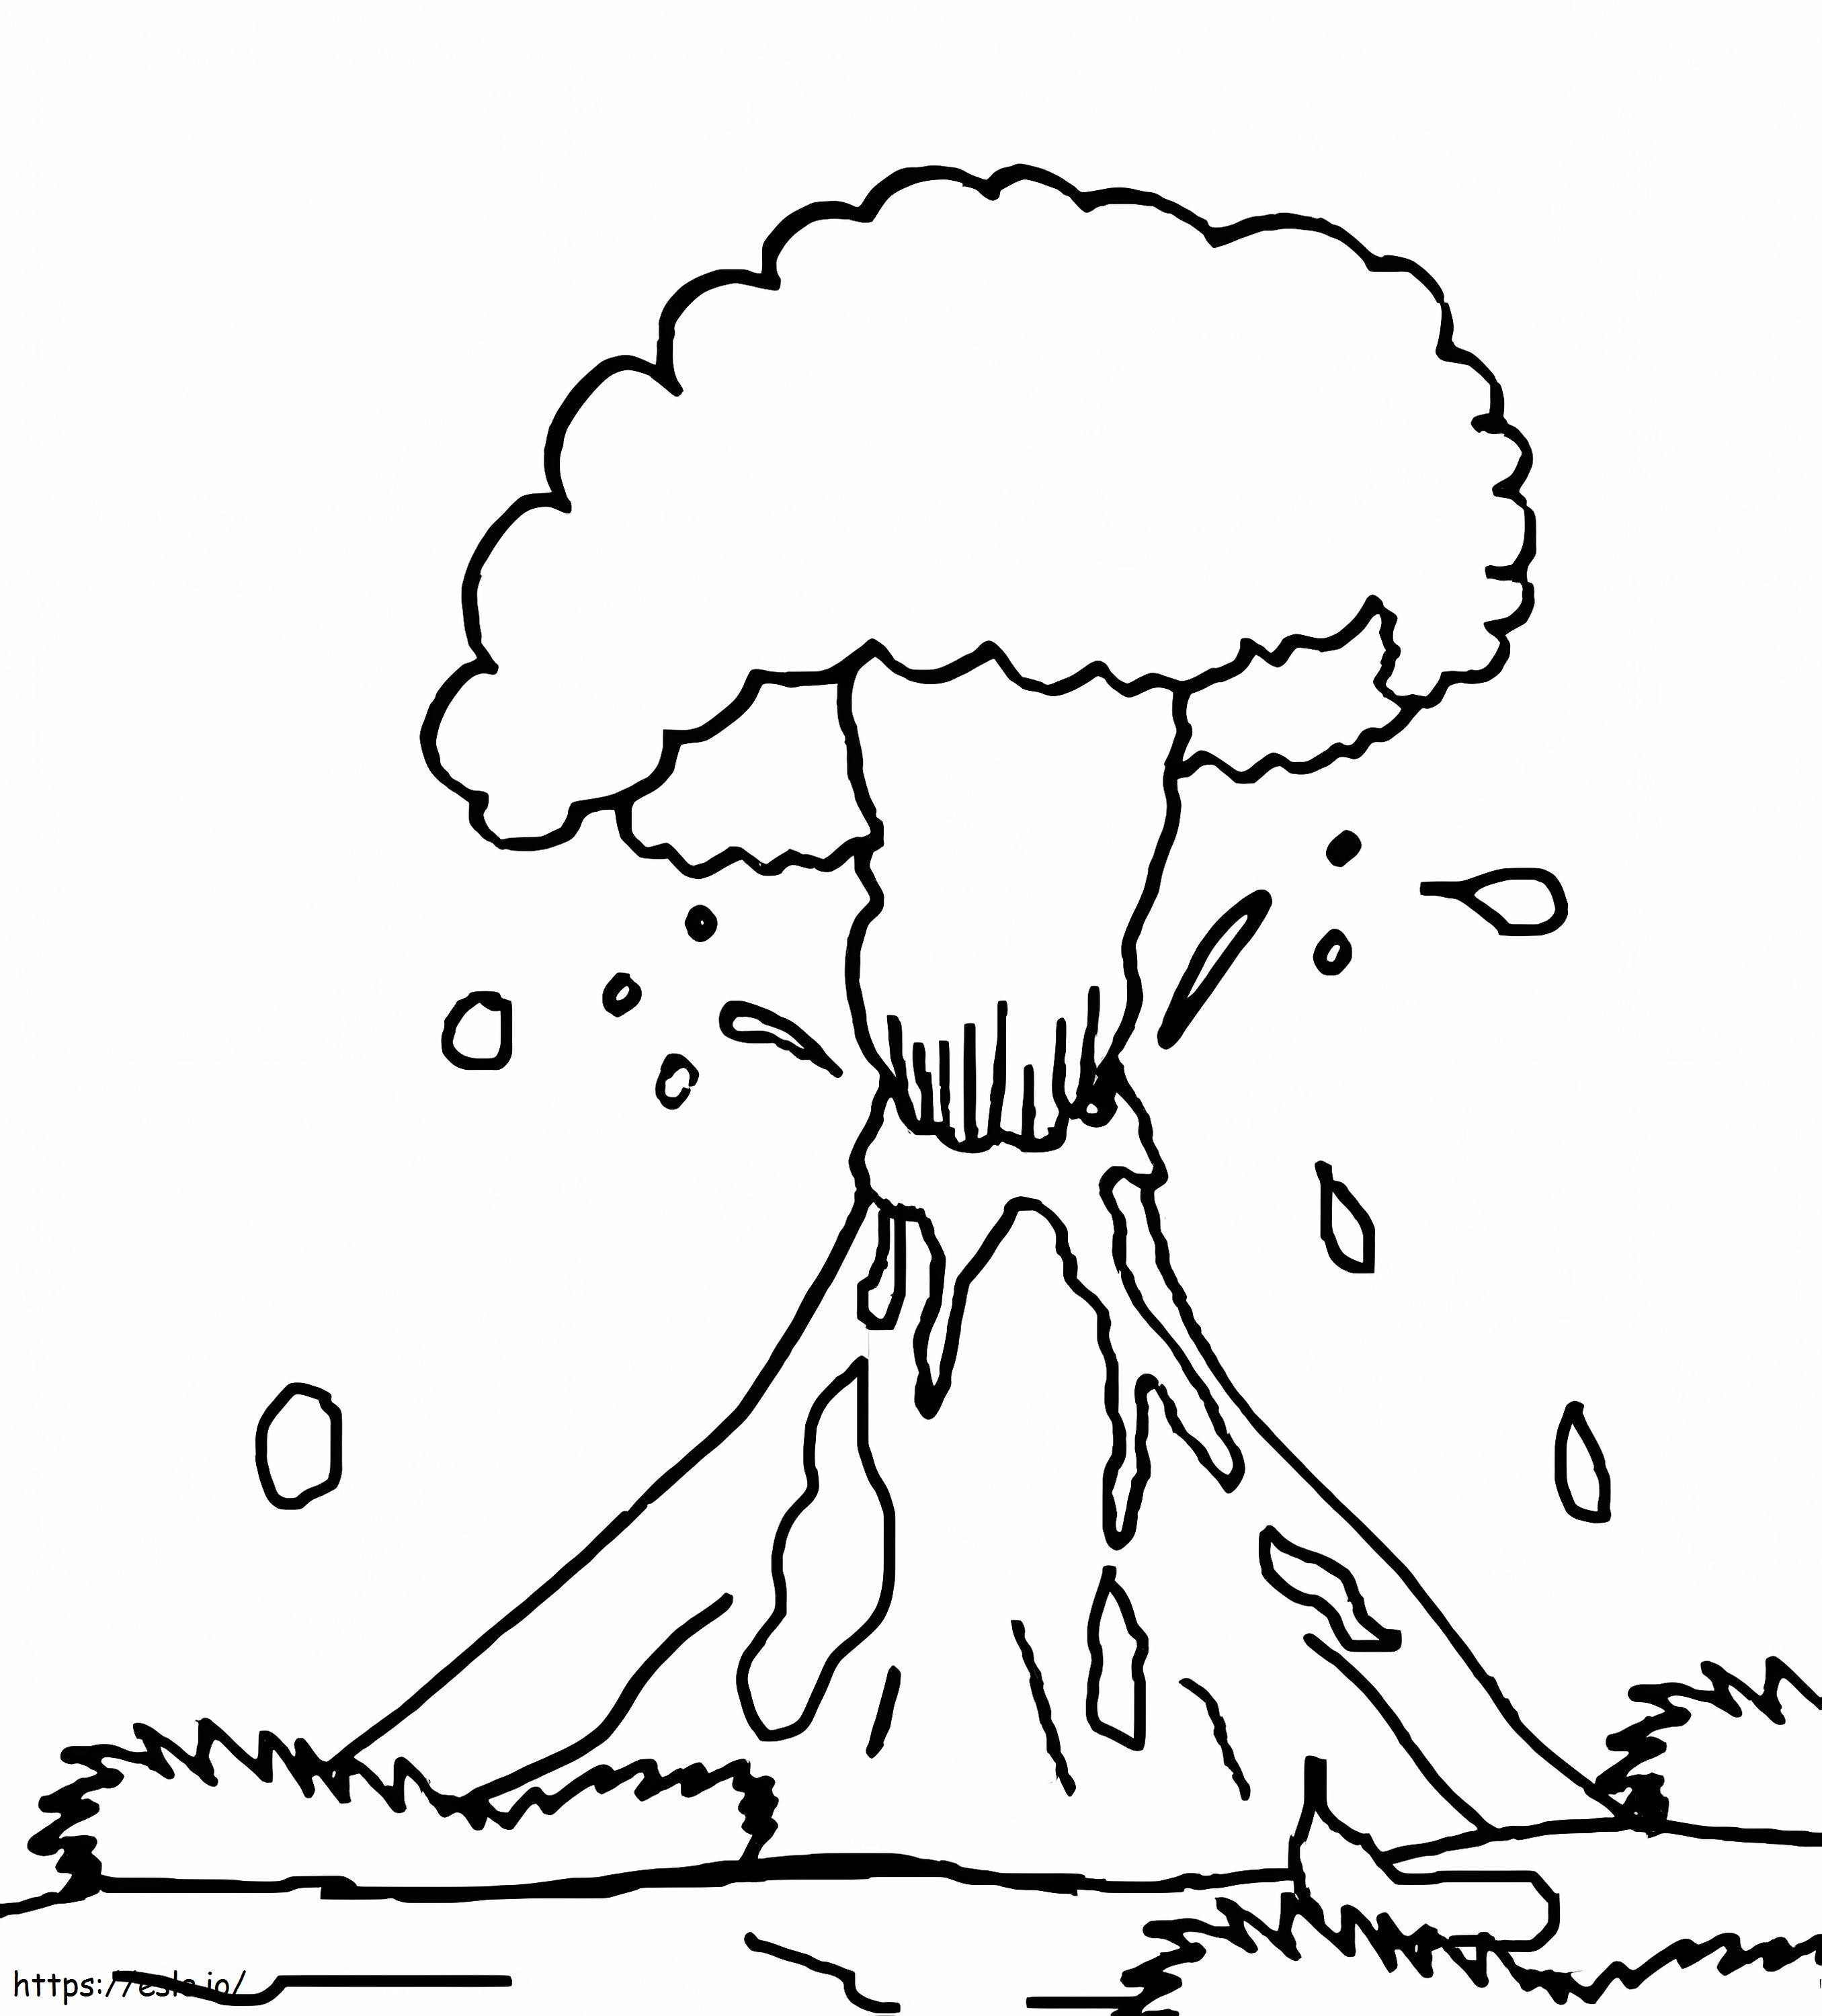 Erupting Volcano 2 coloring page